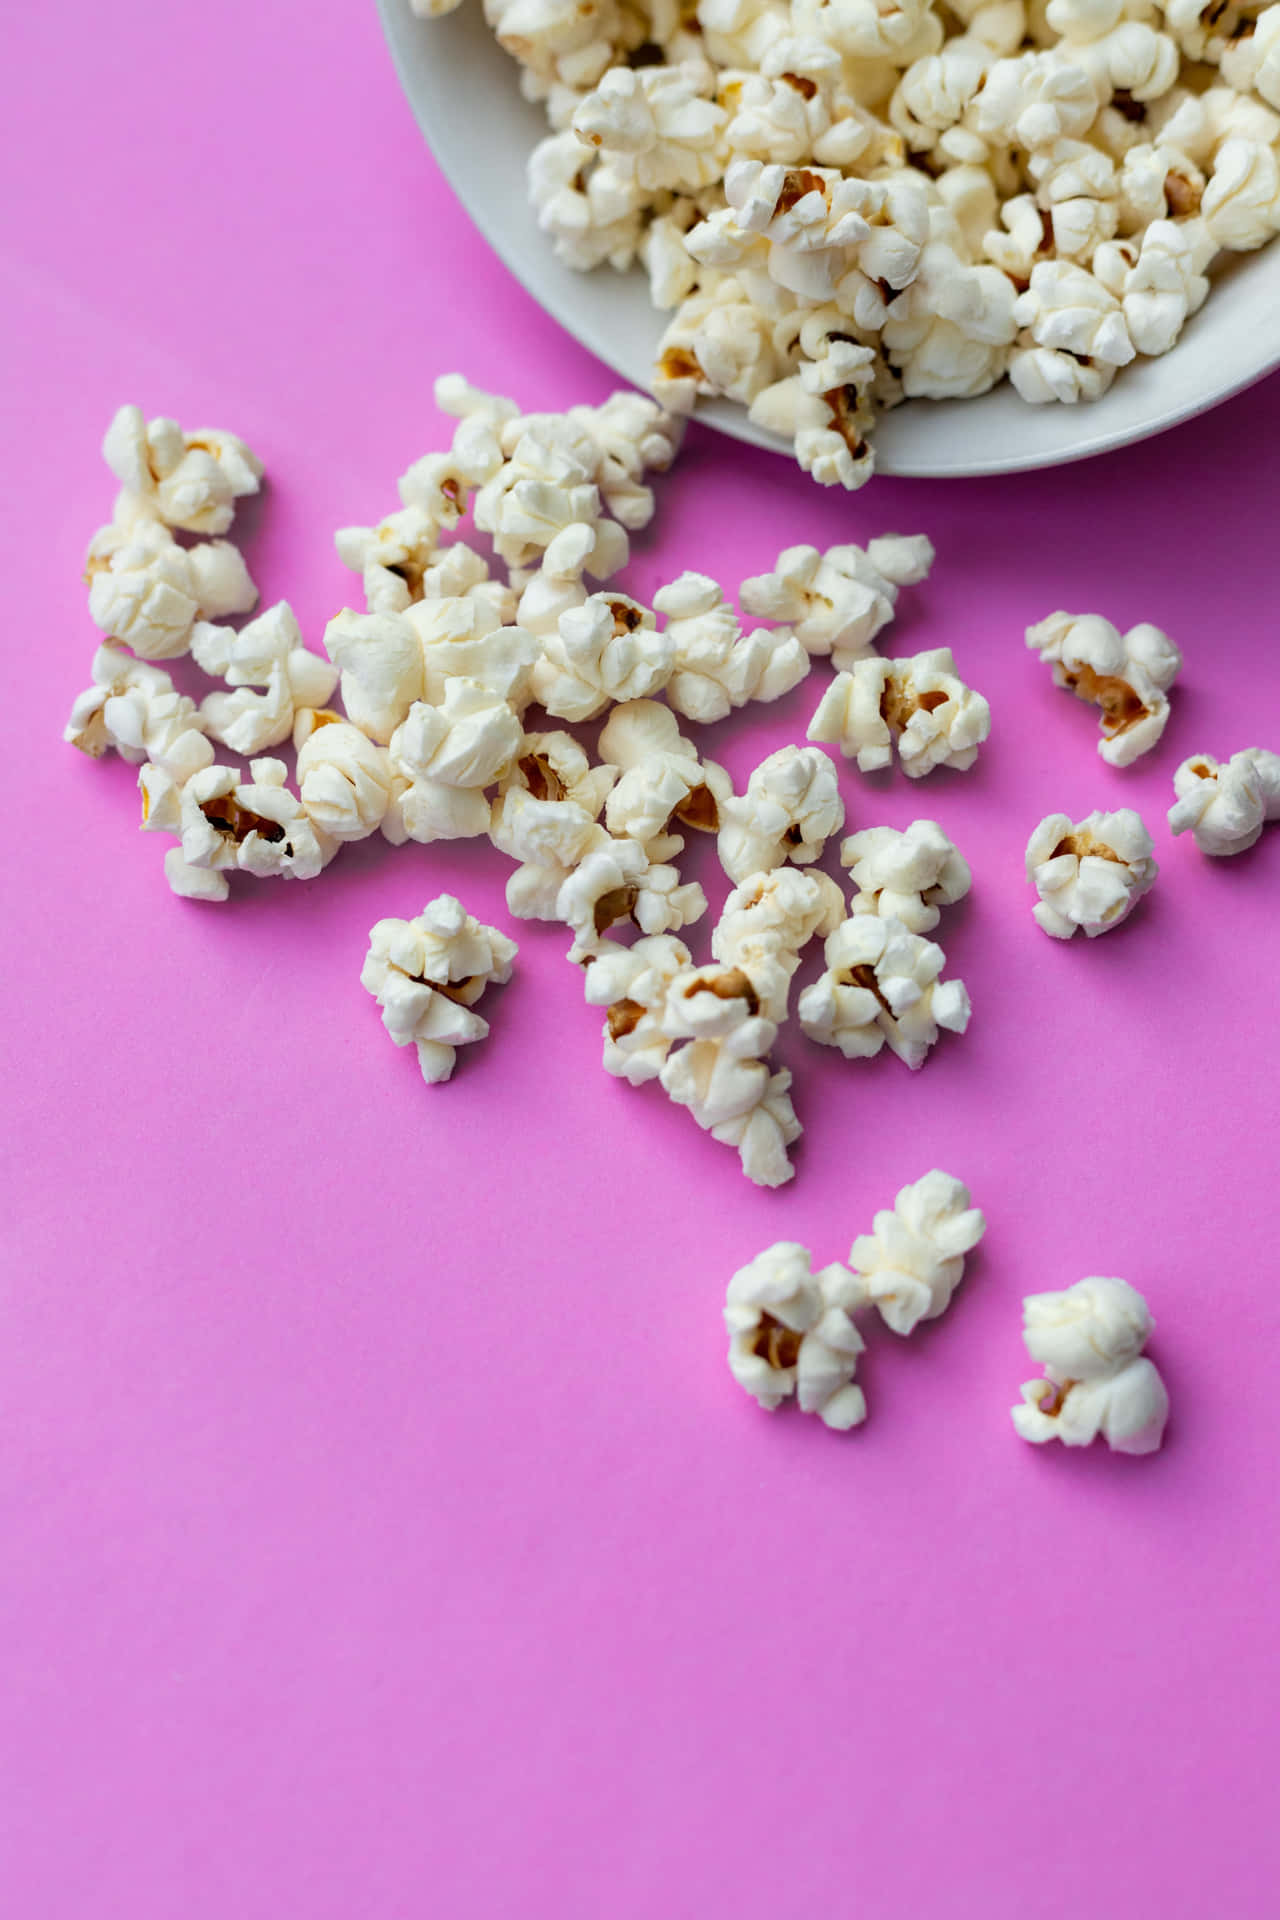 A bucket of fresh and inviting popcorn.